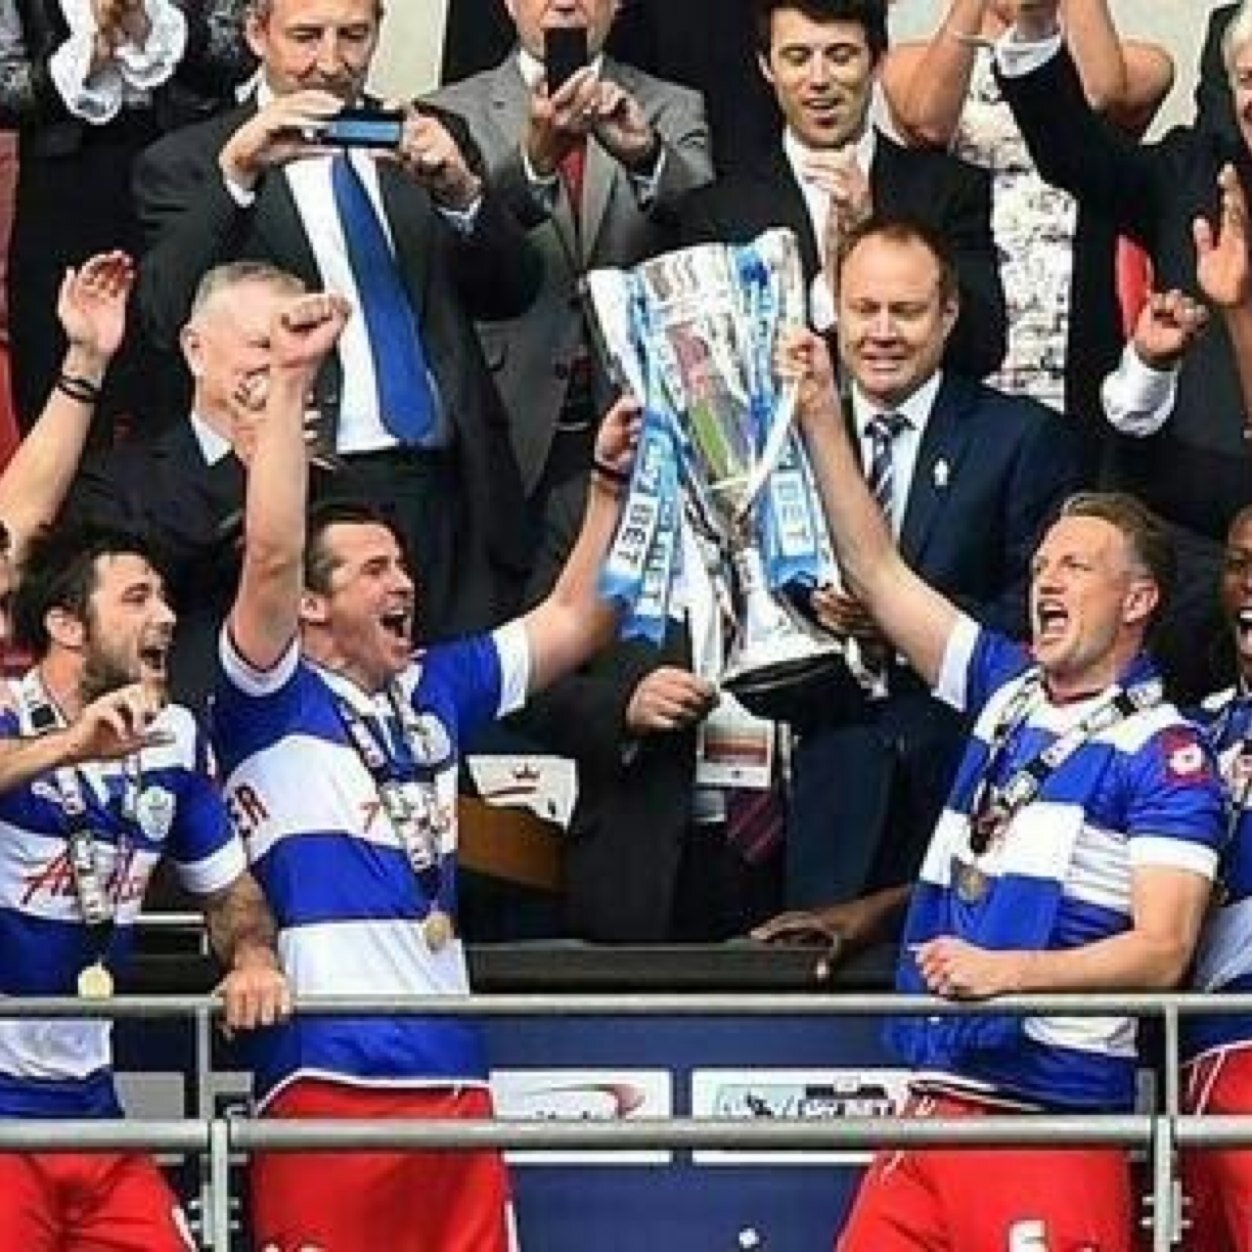 QPR life love and always,